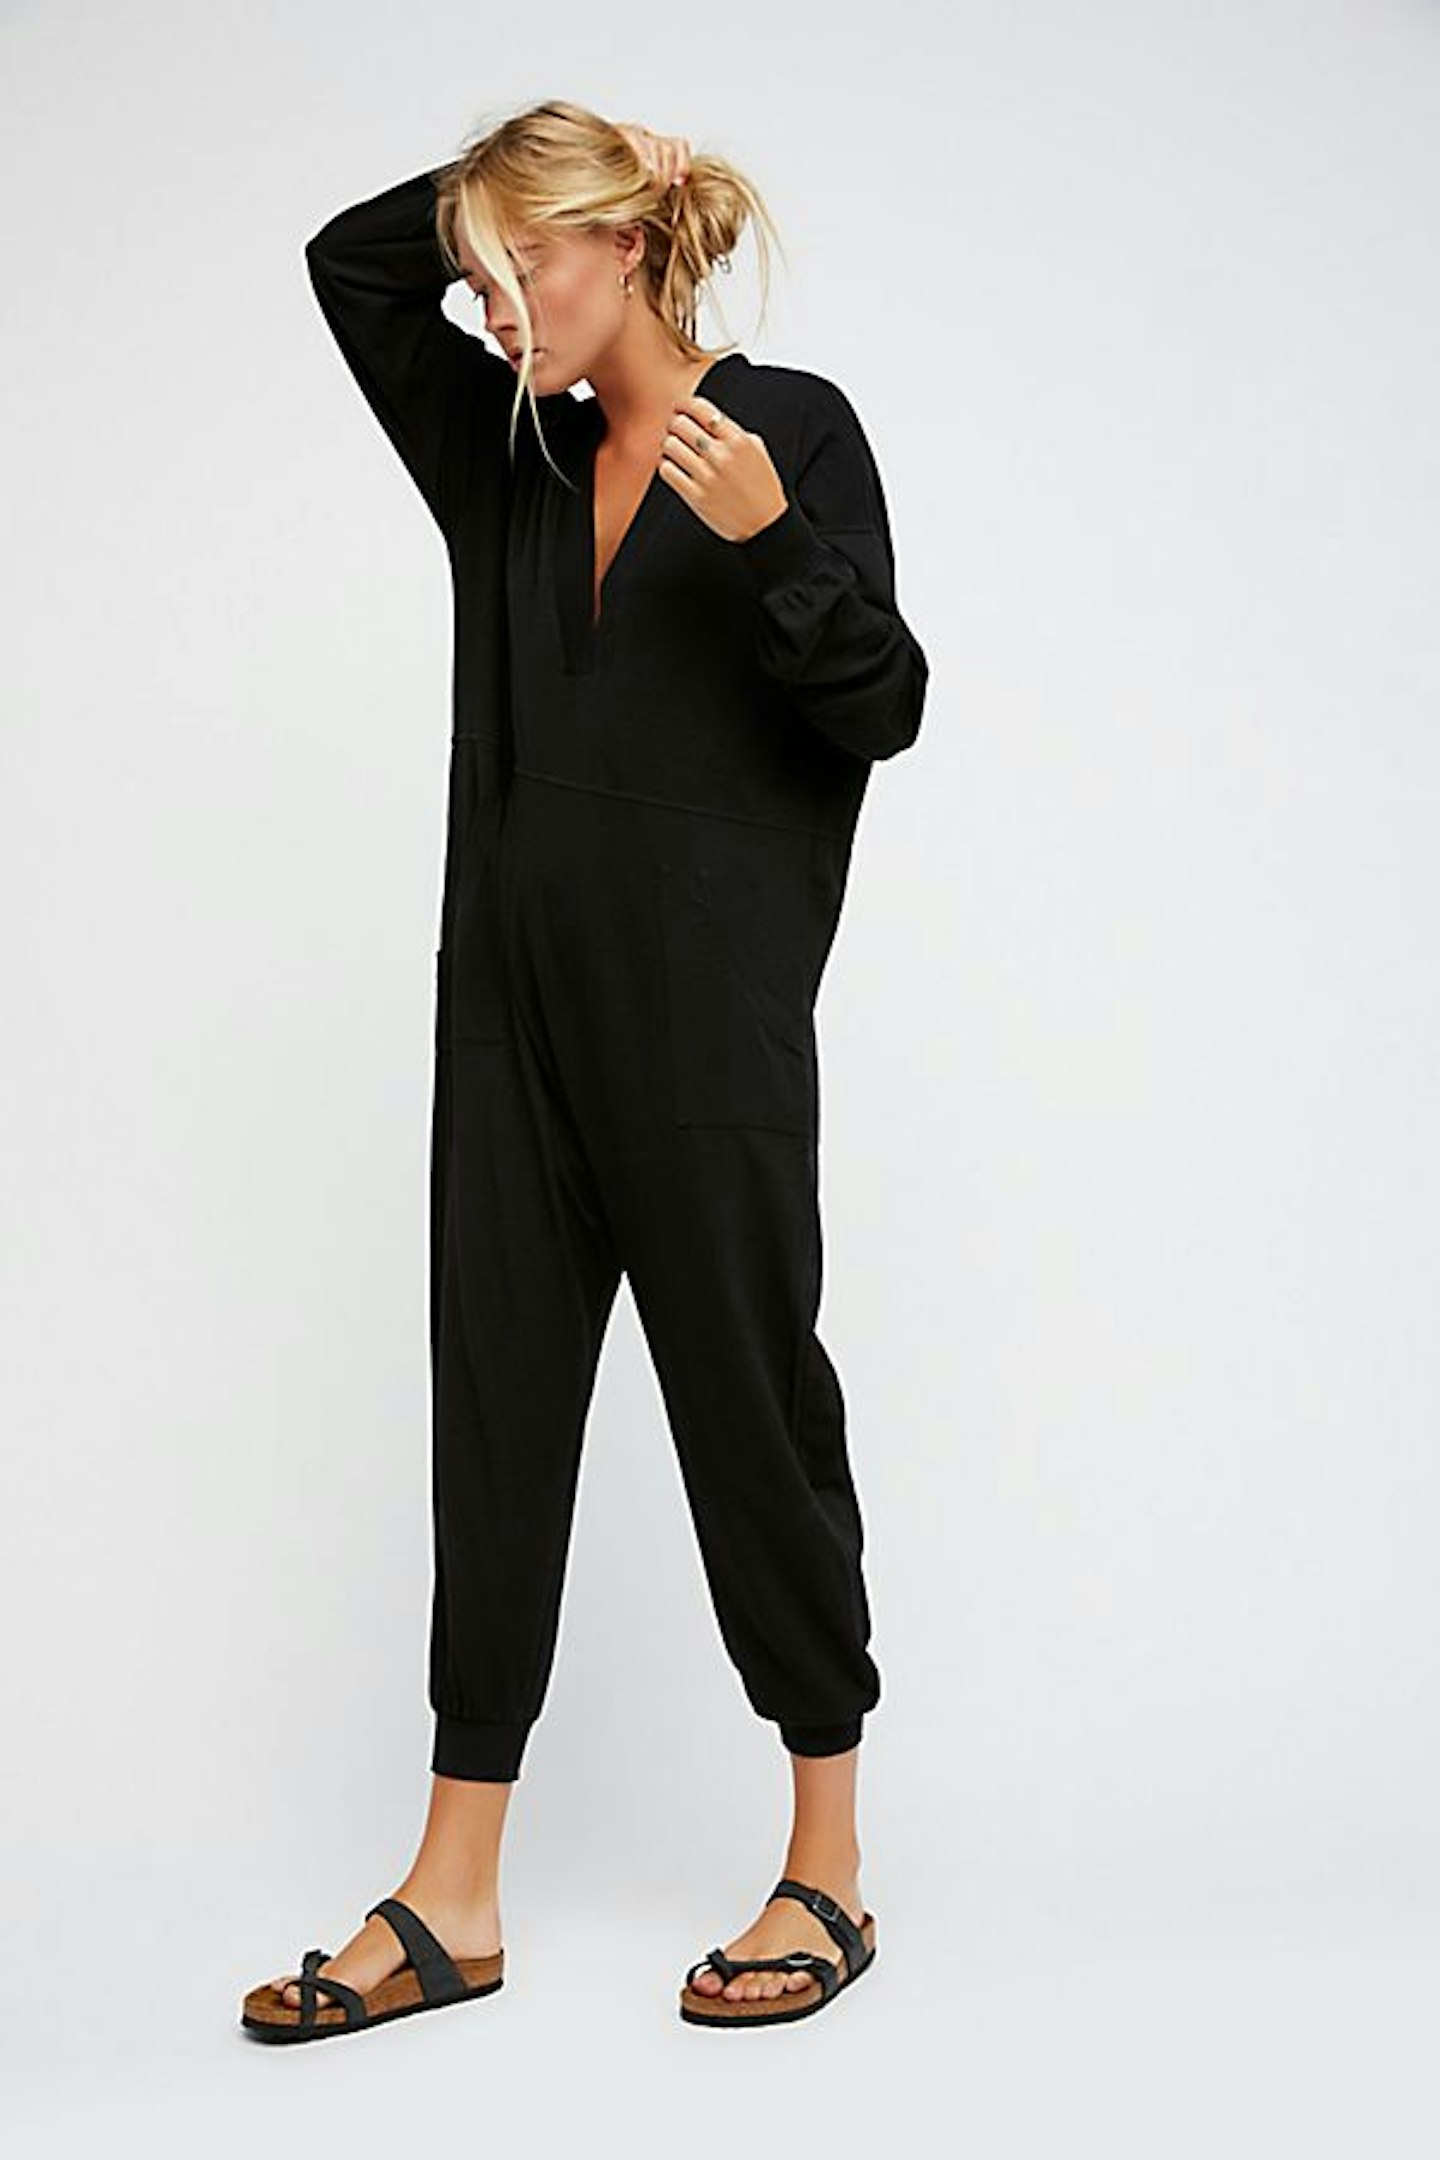 Free People, Cosy Black All-In-One, £98